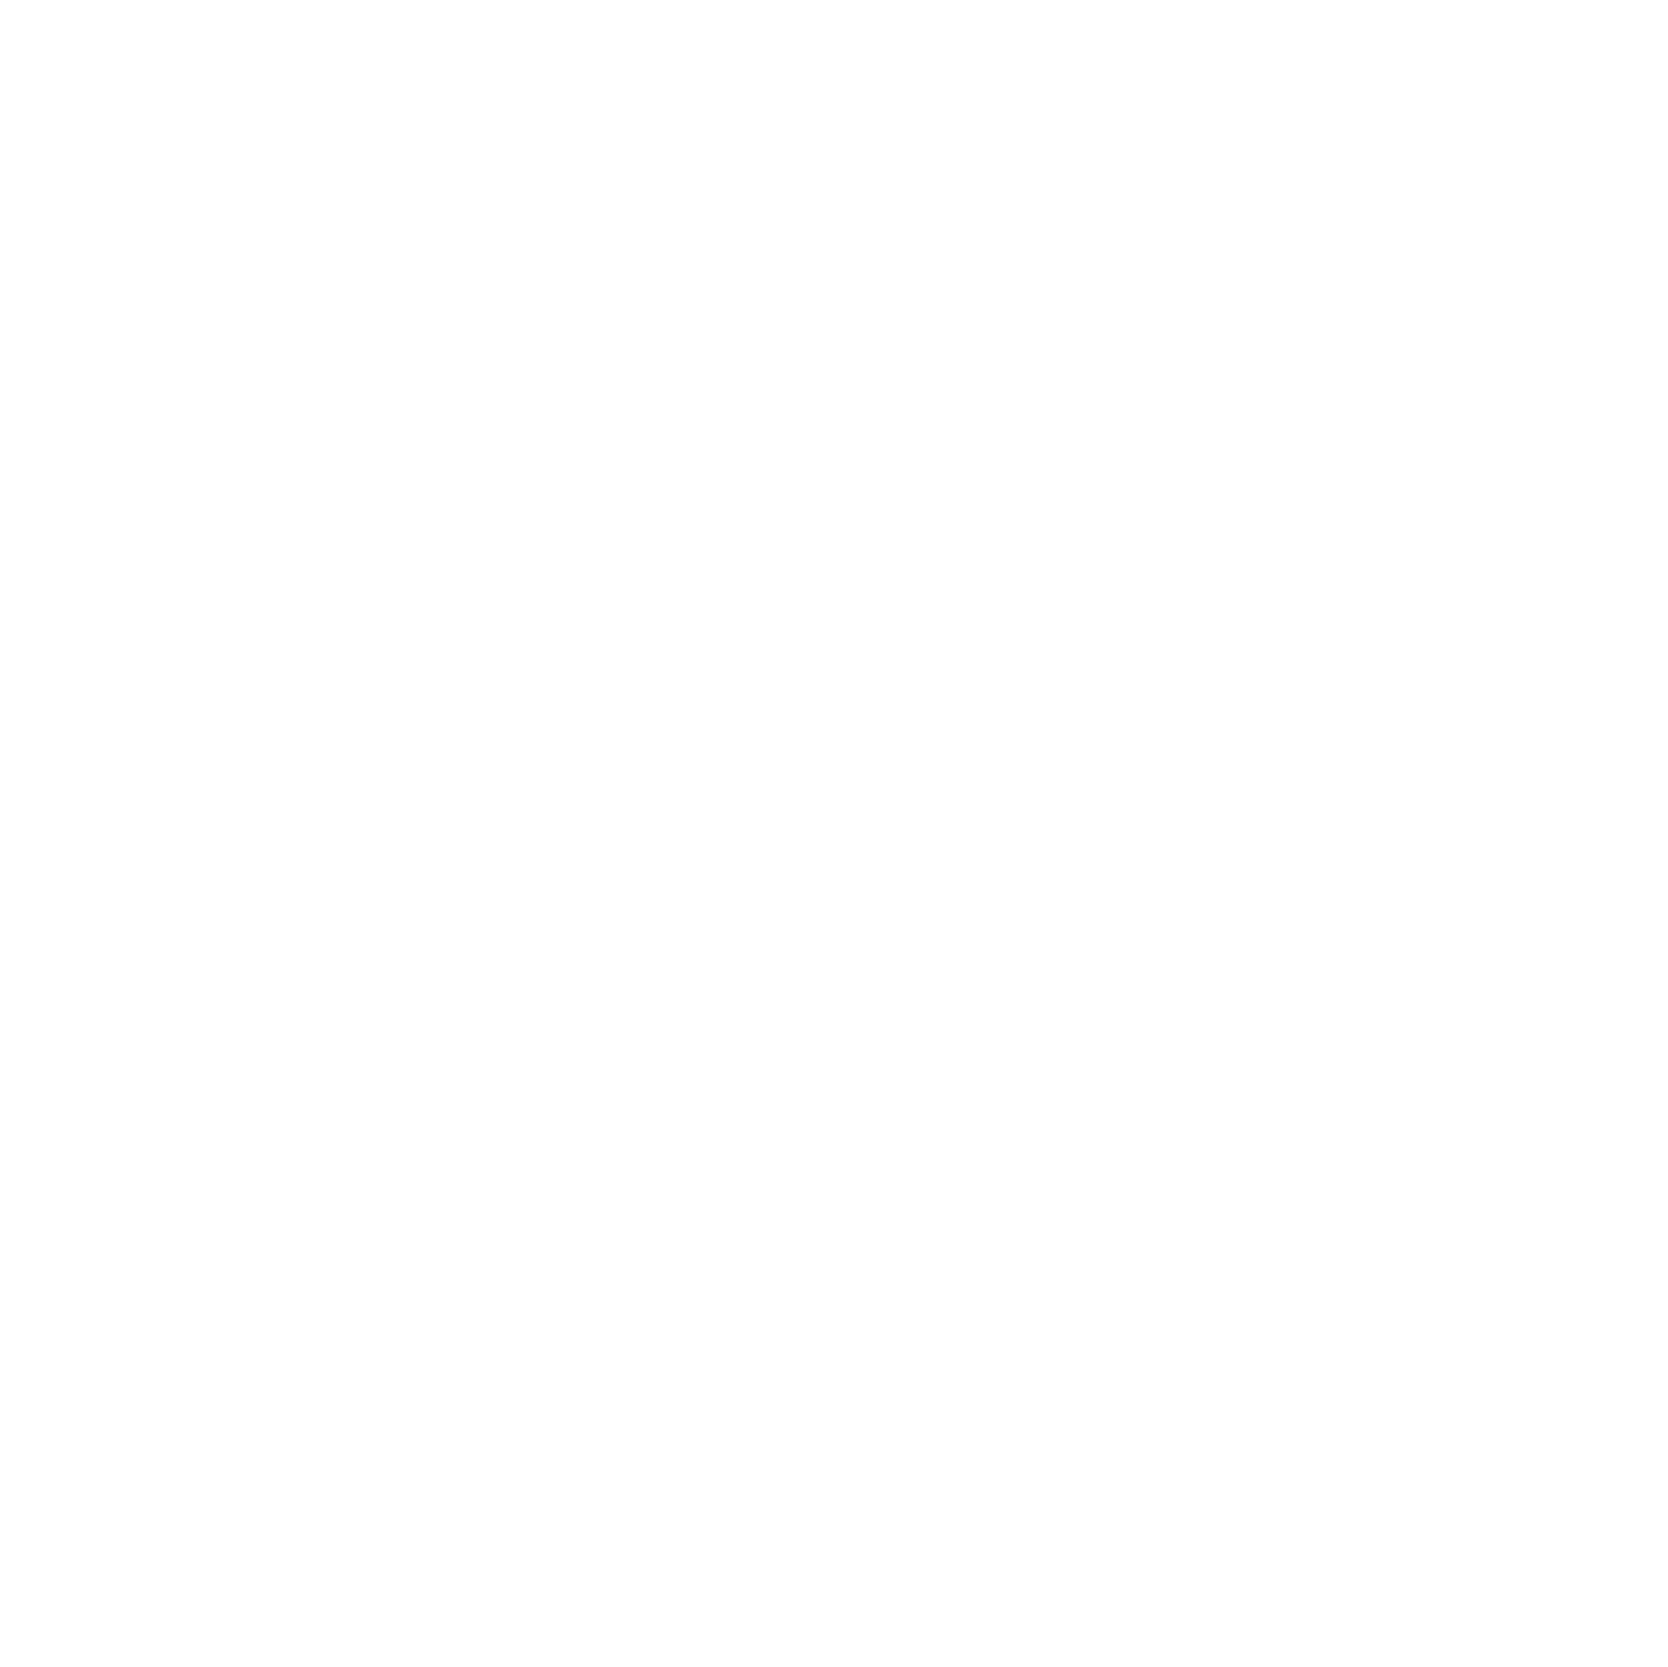 white icon of 3 people with text box of heart emoji above them